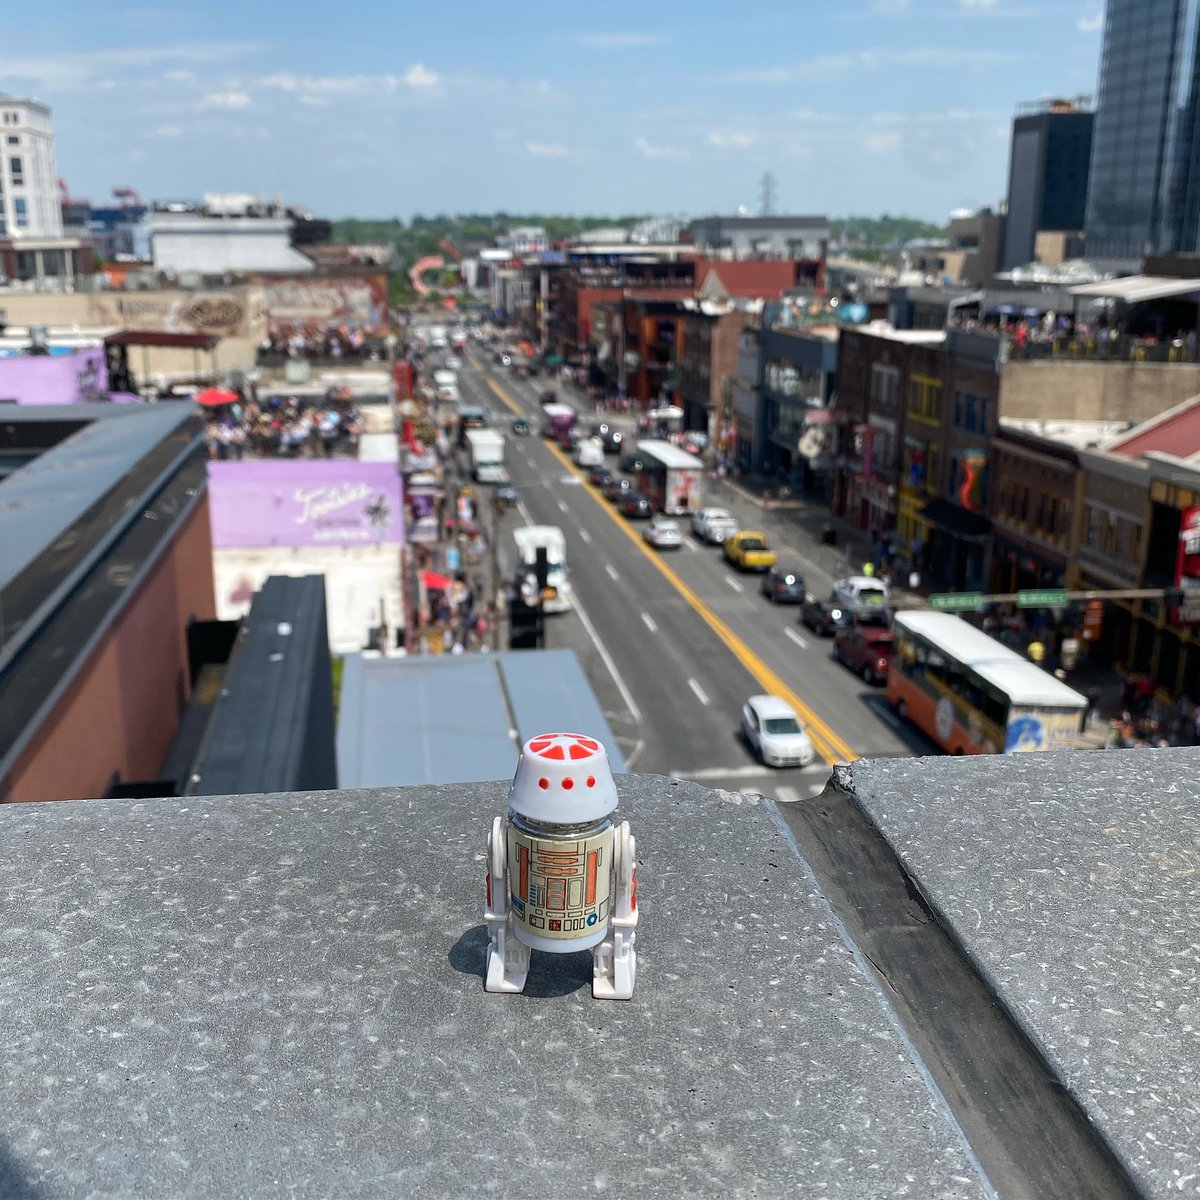 R5 is happy to see the crowd on the street thin out with lunch hour over. #vacation #nashville #icccon #r5d4 #starwars #collector #roadtrip #husband #gay #actionfigure #kenner #tennessee #downtownnashville #broadwaynashville #broadway